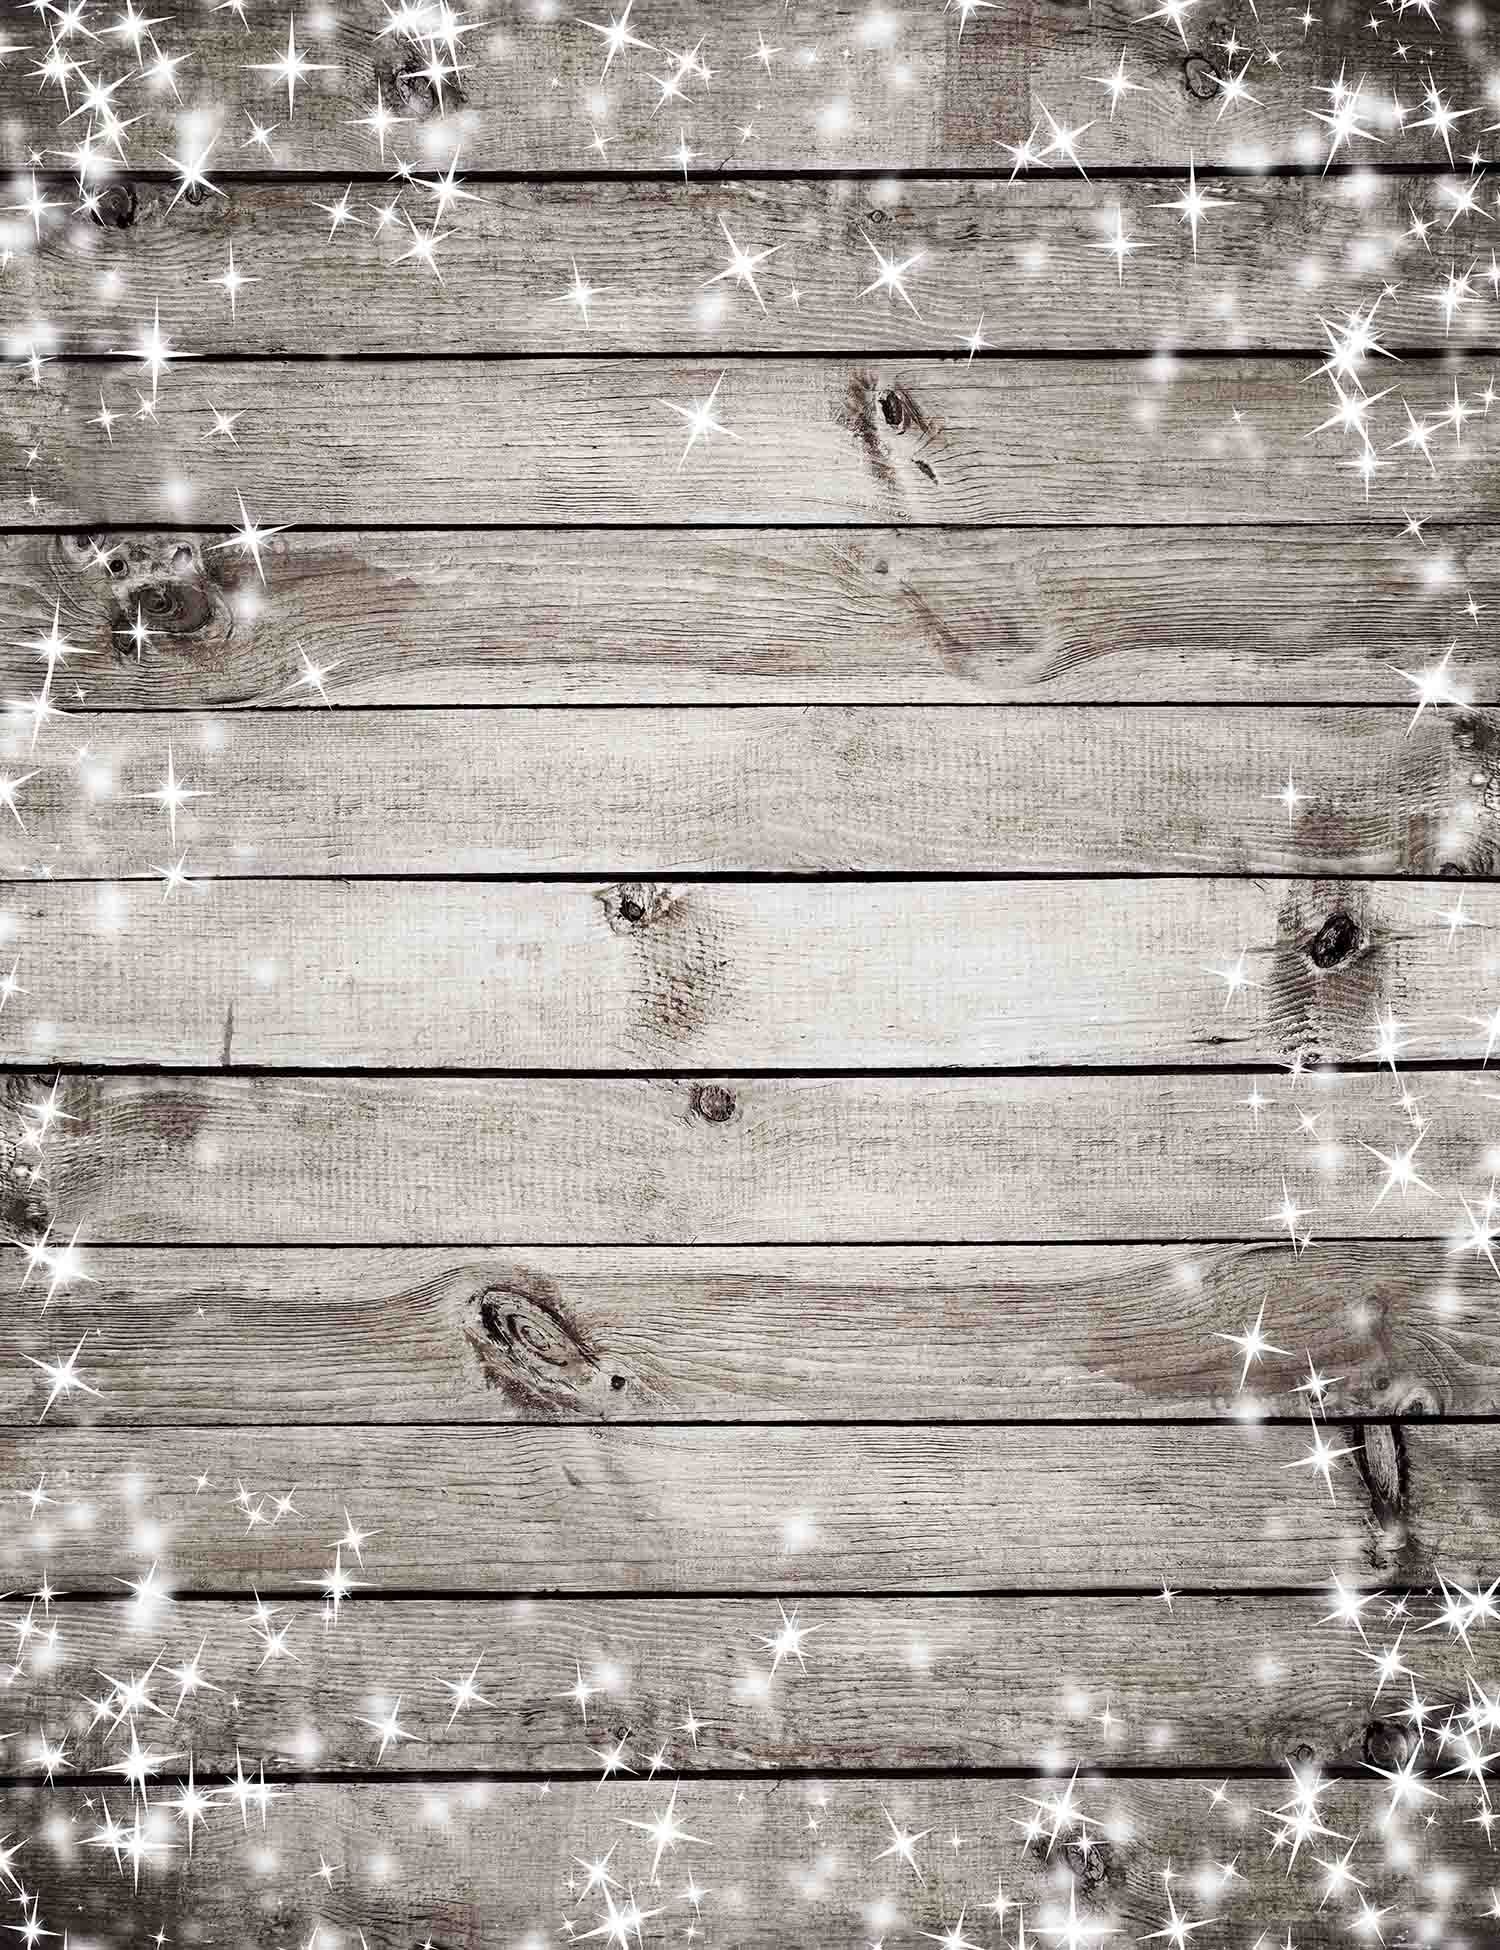 Wood Floor With Sparkles Stars Around Edges For Christmas Backdrop Shopbackdrop